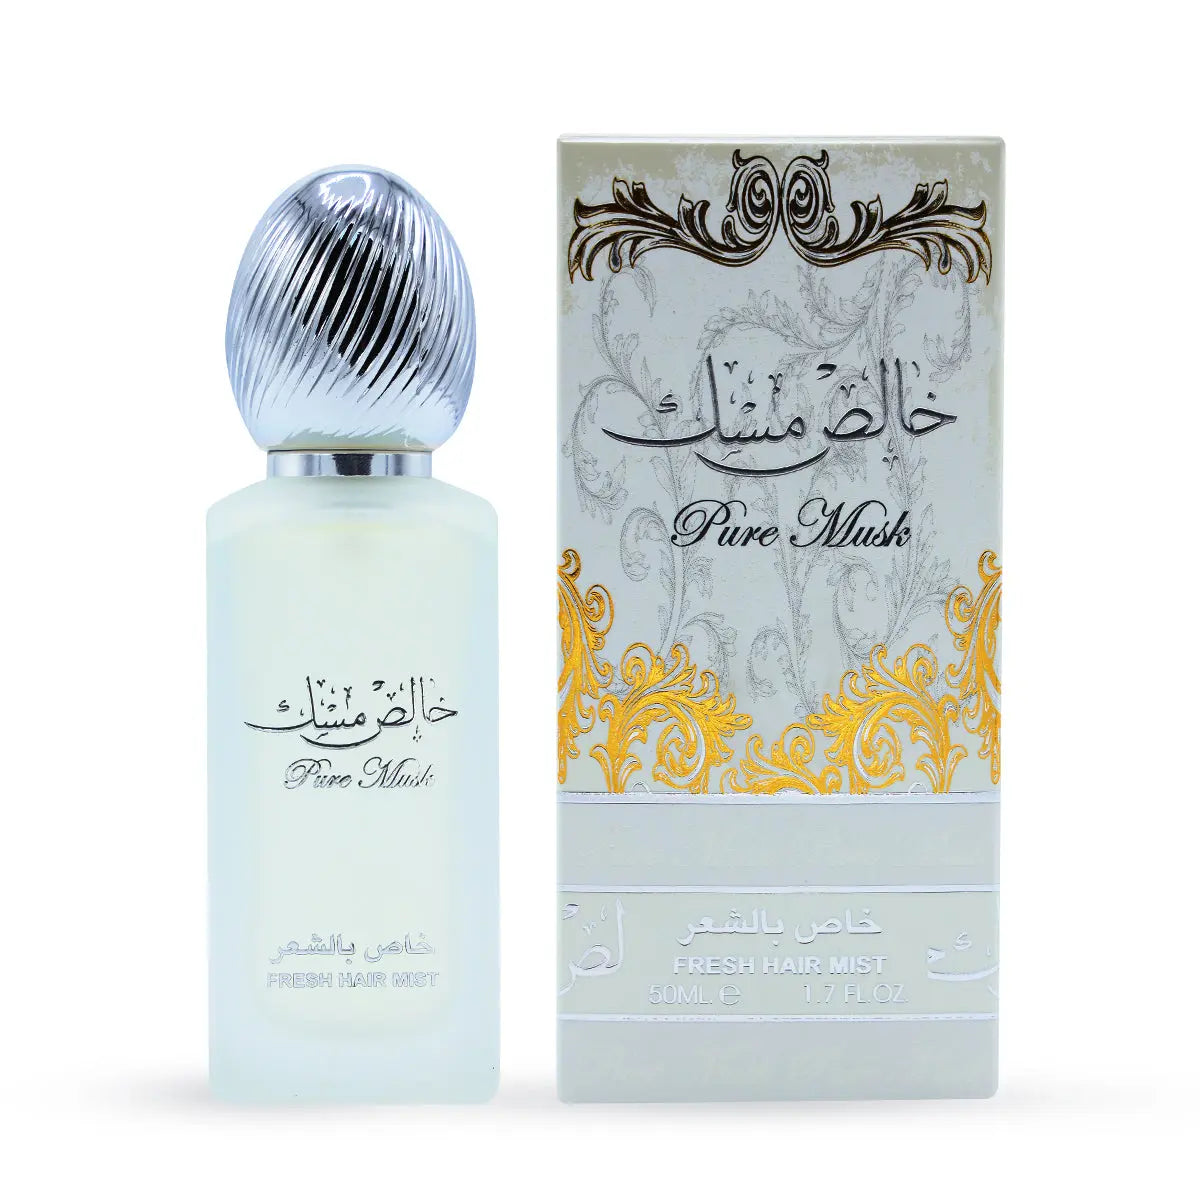  The image shows a product setup which includes a perfume or hair mist bottle next to its packaging box. The box is off-white with a decorative design featuring floral motifs in gold and possibly silver. Below the ornate design, there's a label that reads "FRESH HAIR MIST" along with the volume "50ML" and "1.7 FL.OZ." in English and Arabic.